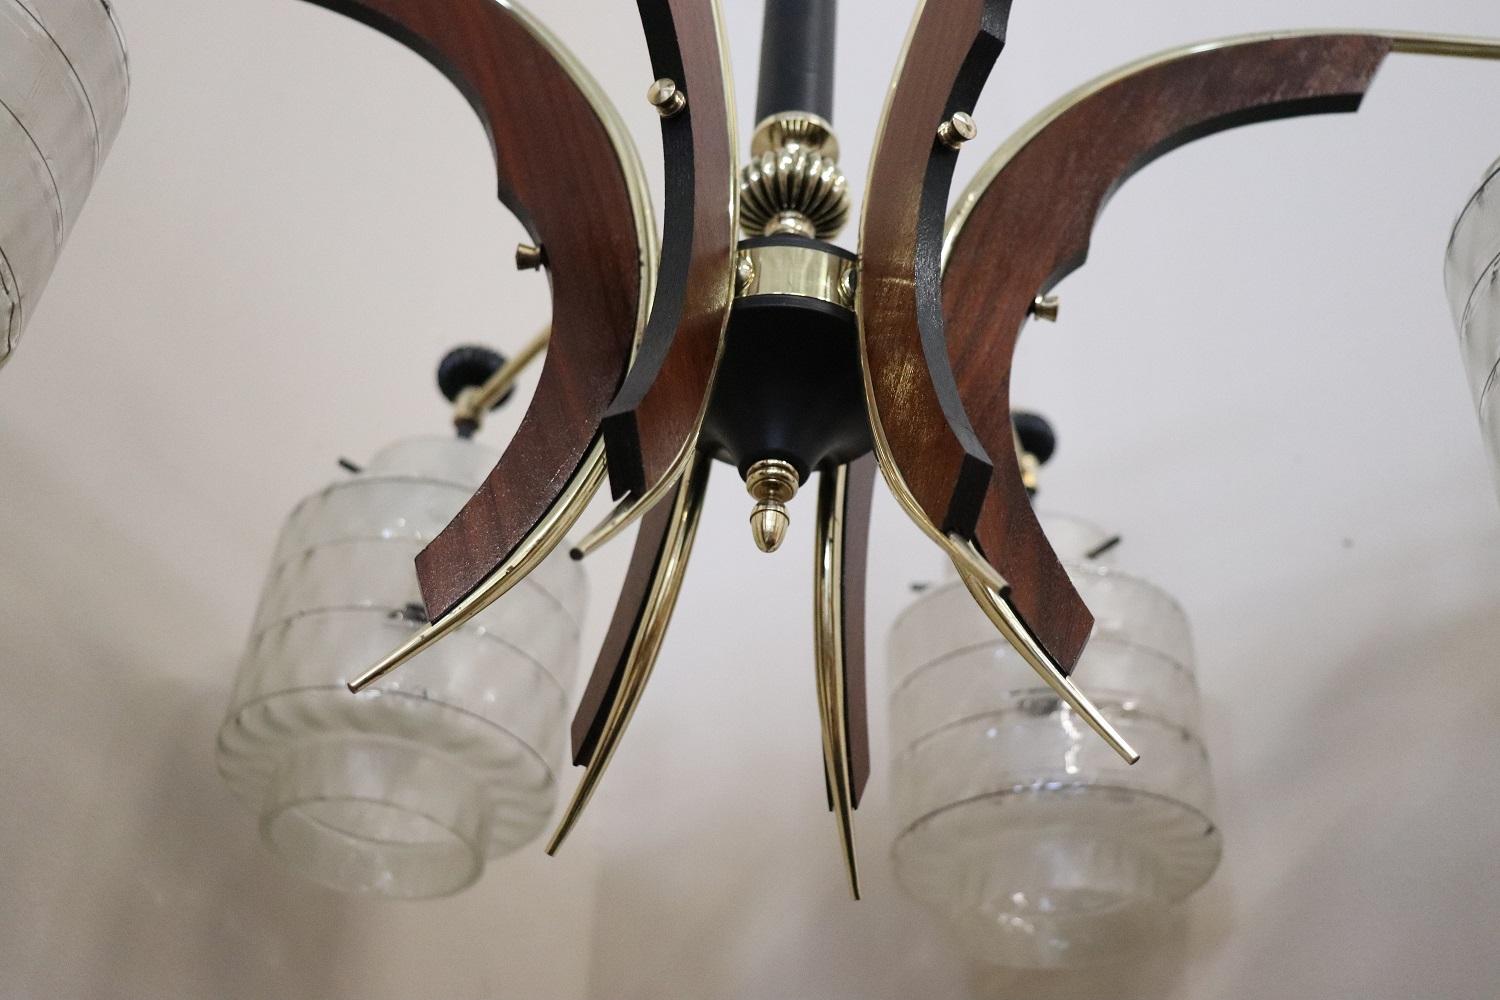 Italian Design Glass Bolws, Black Lacquered Metal and Brass Chandelier, 1950s For Sale 3